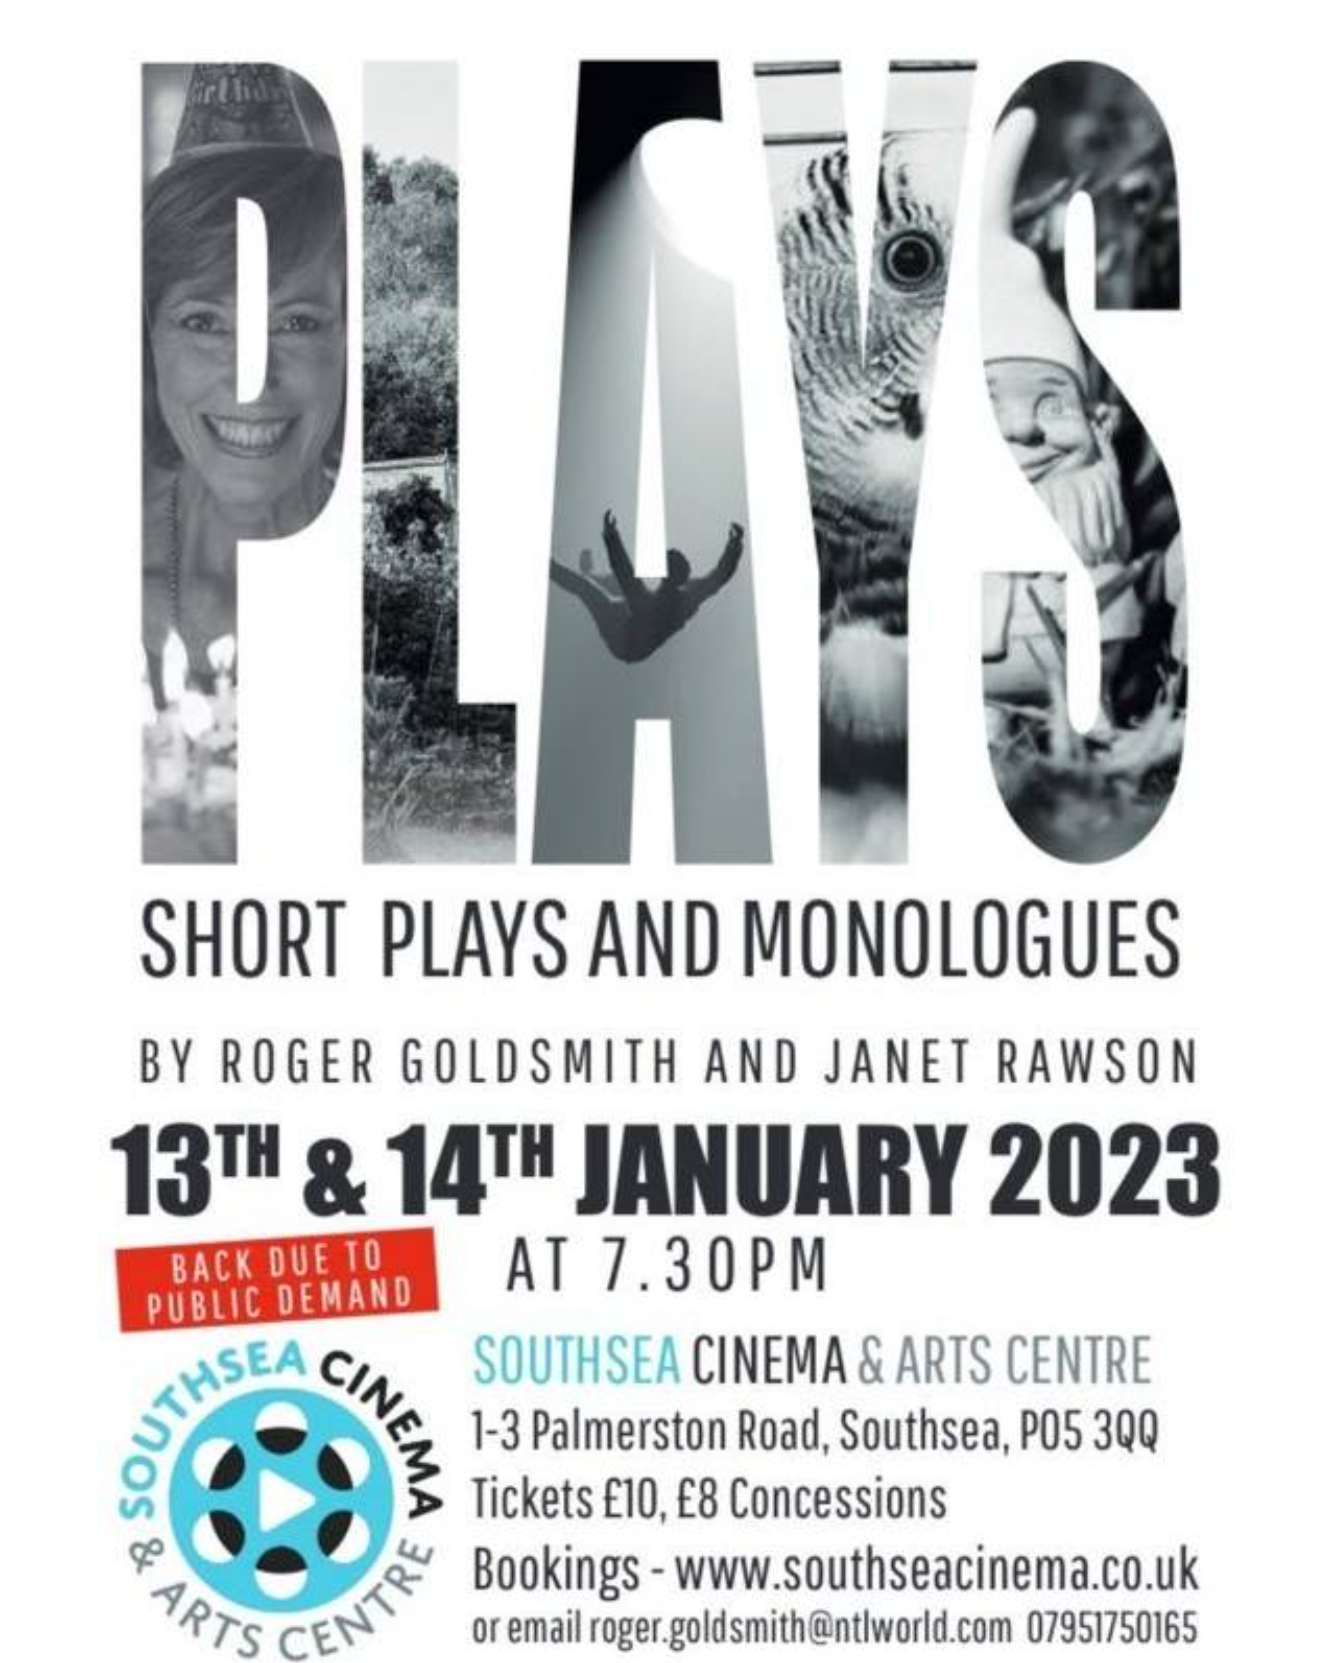 Flyer saying shorts plays and monologues 13th and 14th Jan